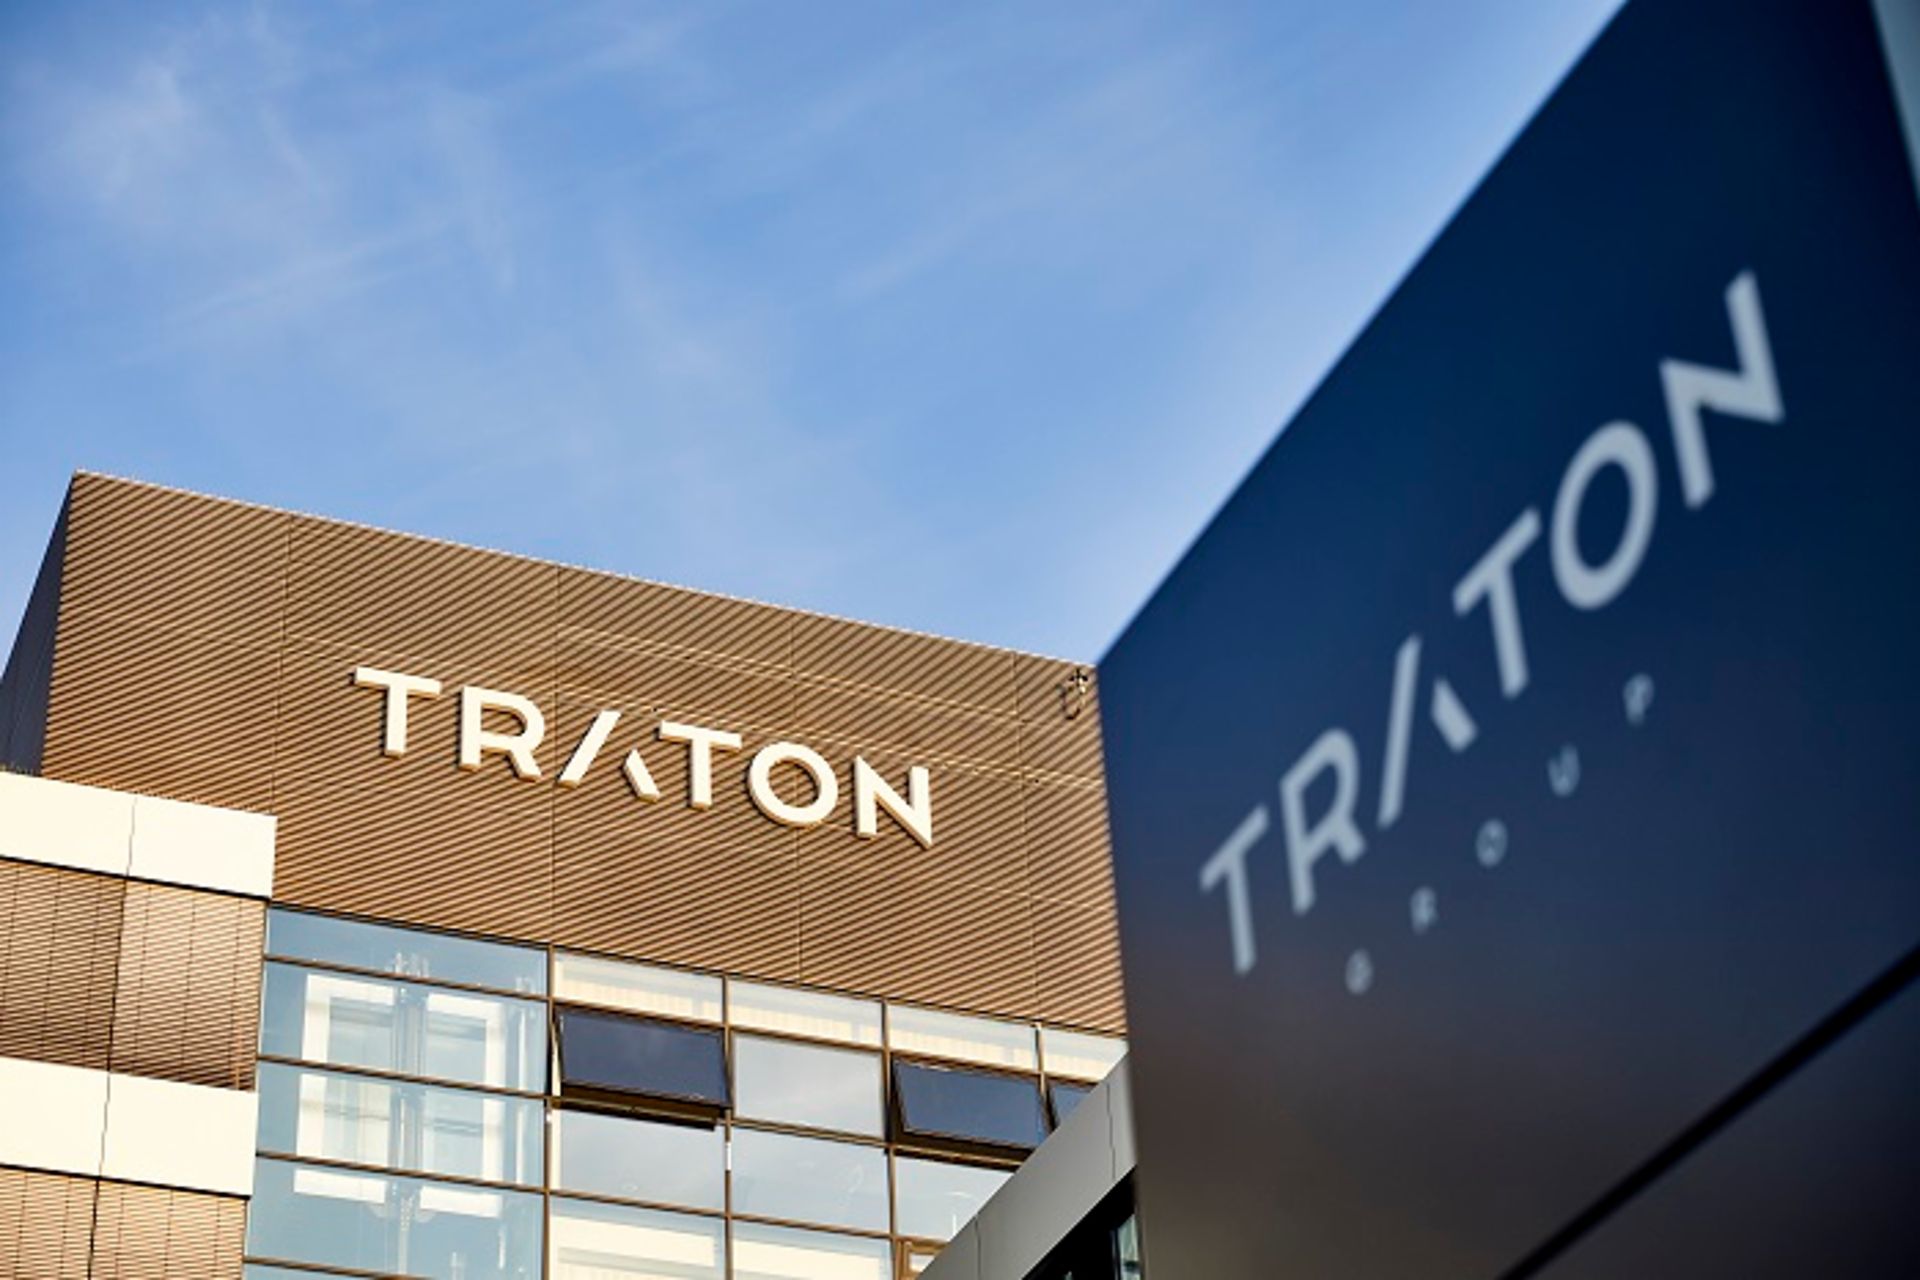 Photo of TRATON building with the logo on the wall on a sunny day